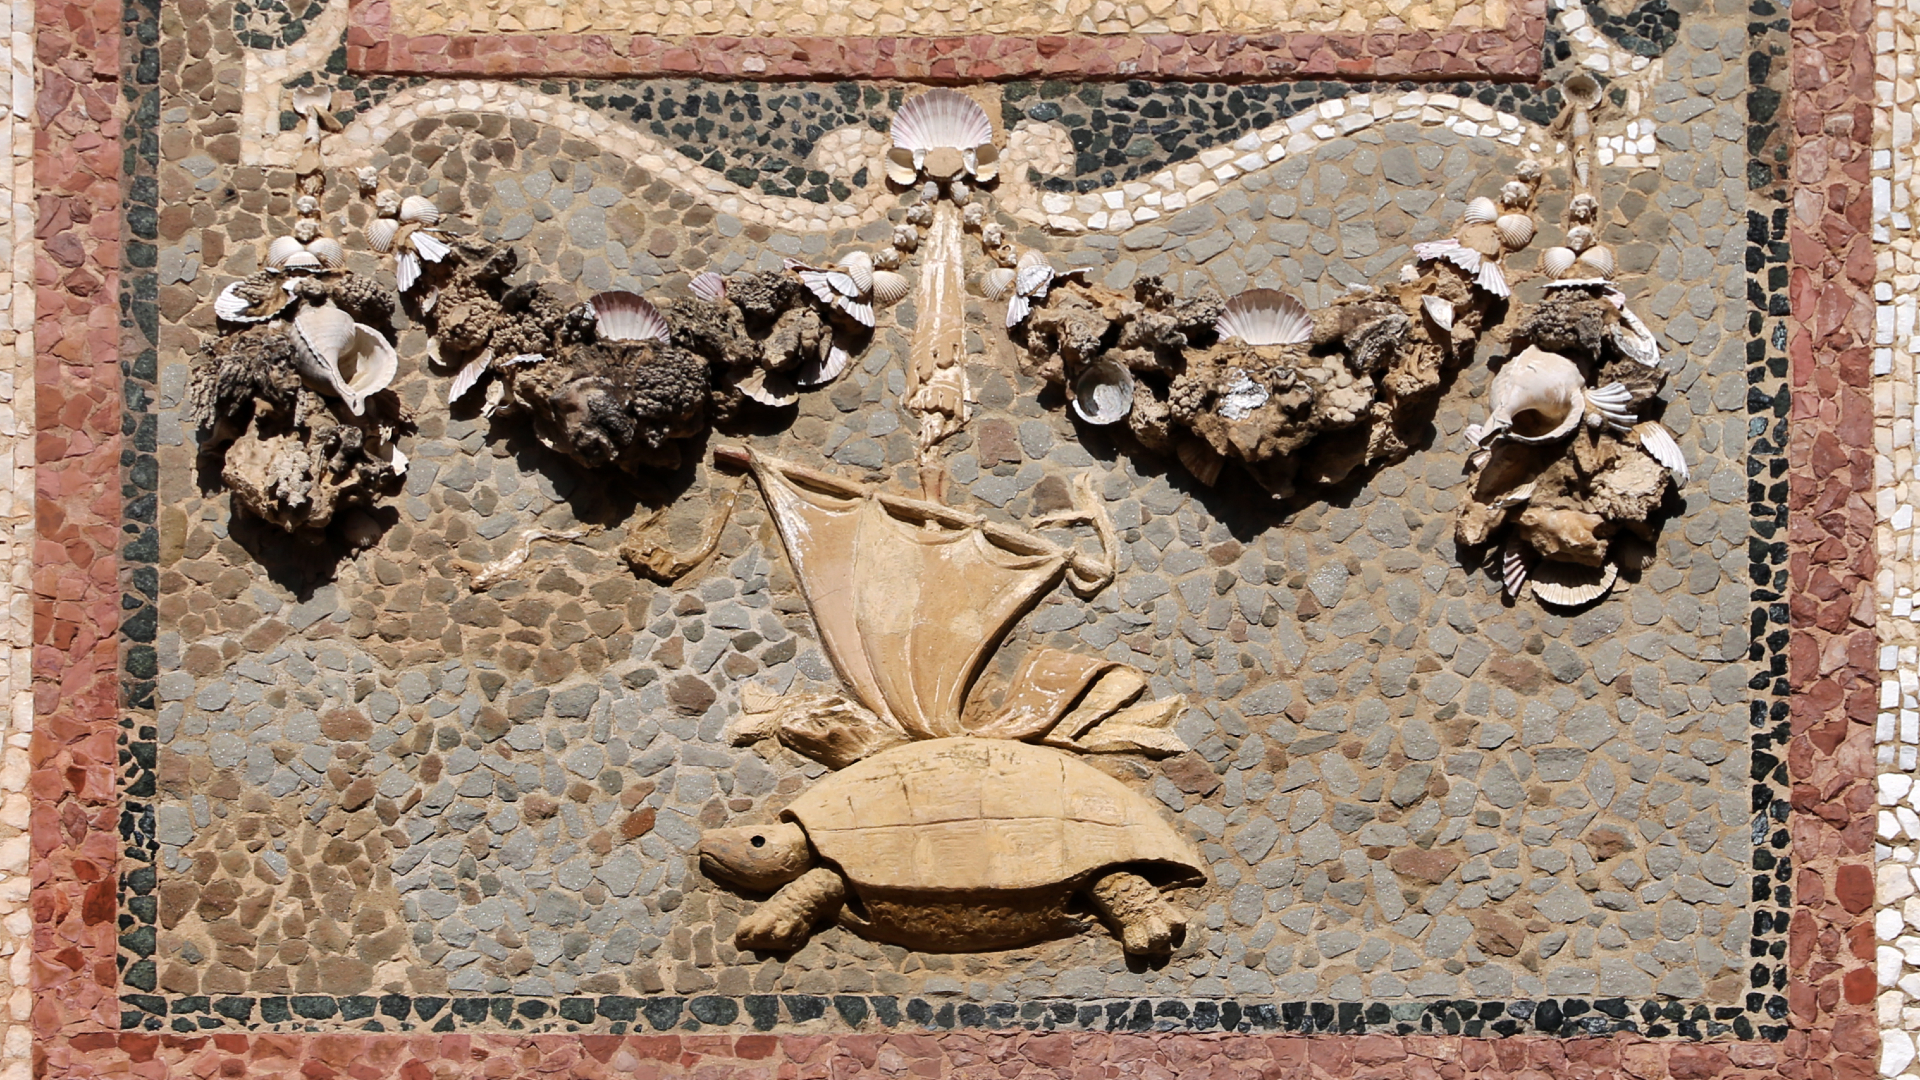 A mosaic at the Buontalenti Grotto features a turtle with a sail on its carapace symbolizing festina lente.